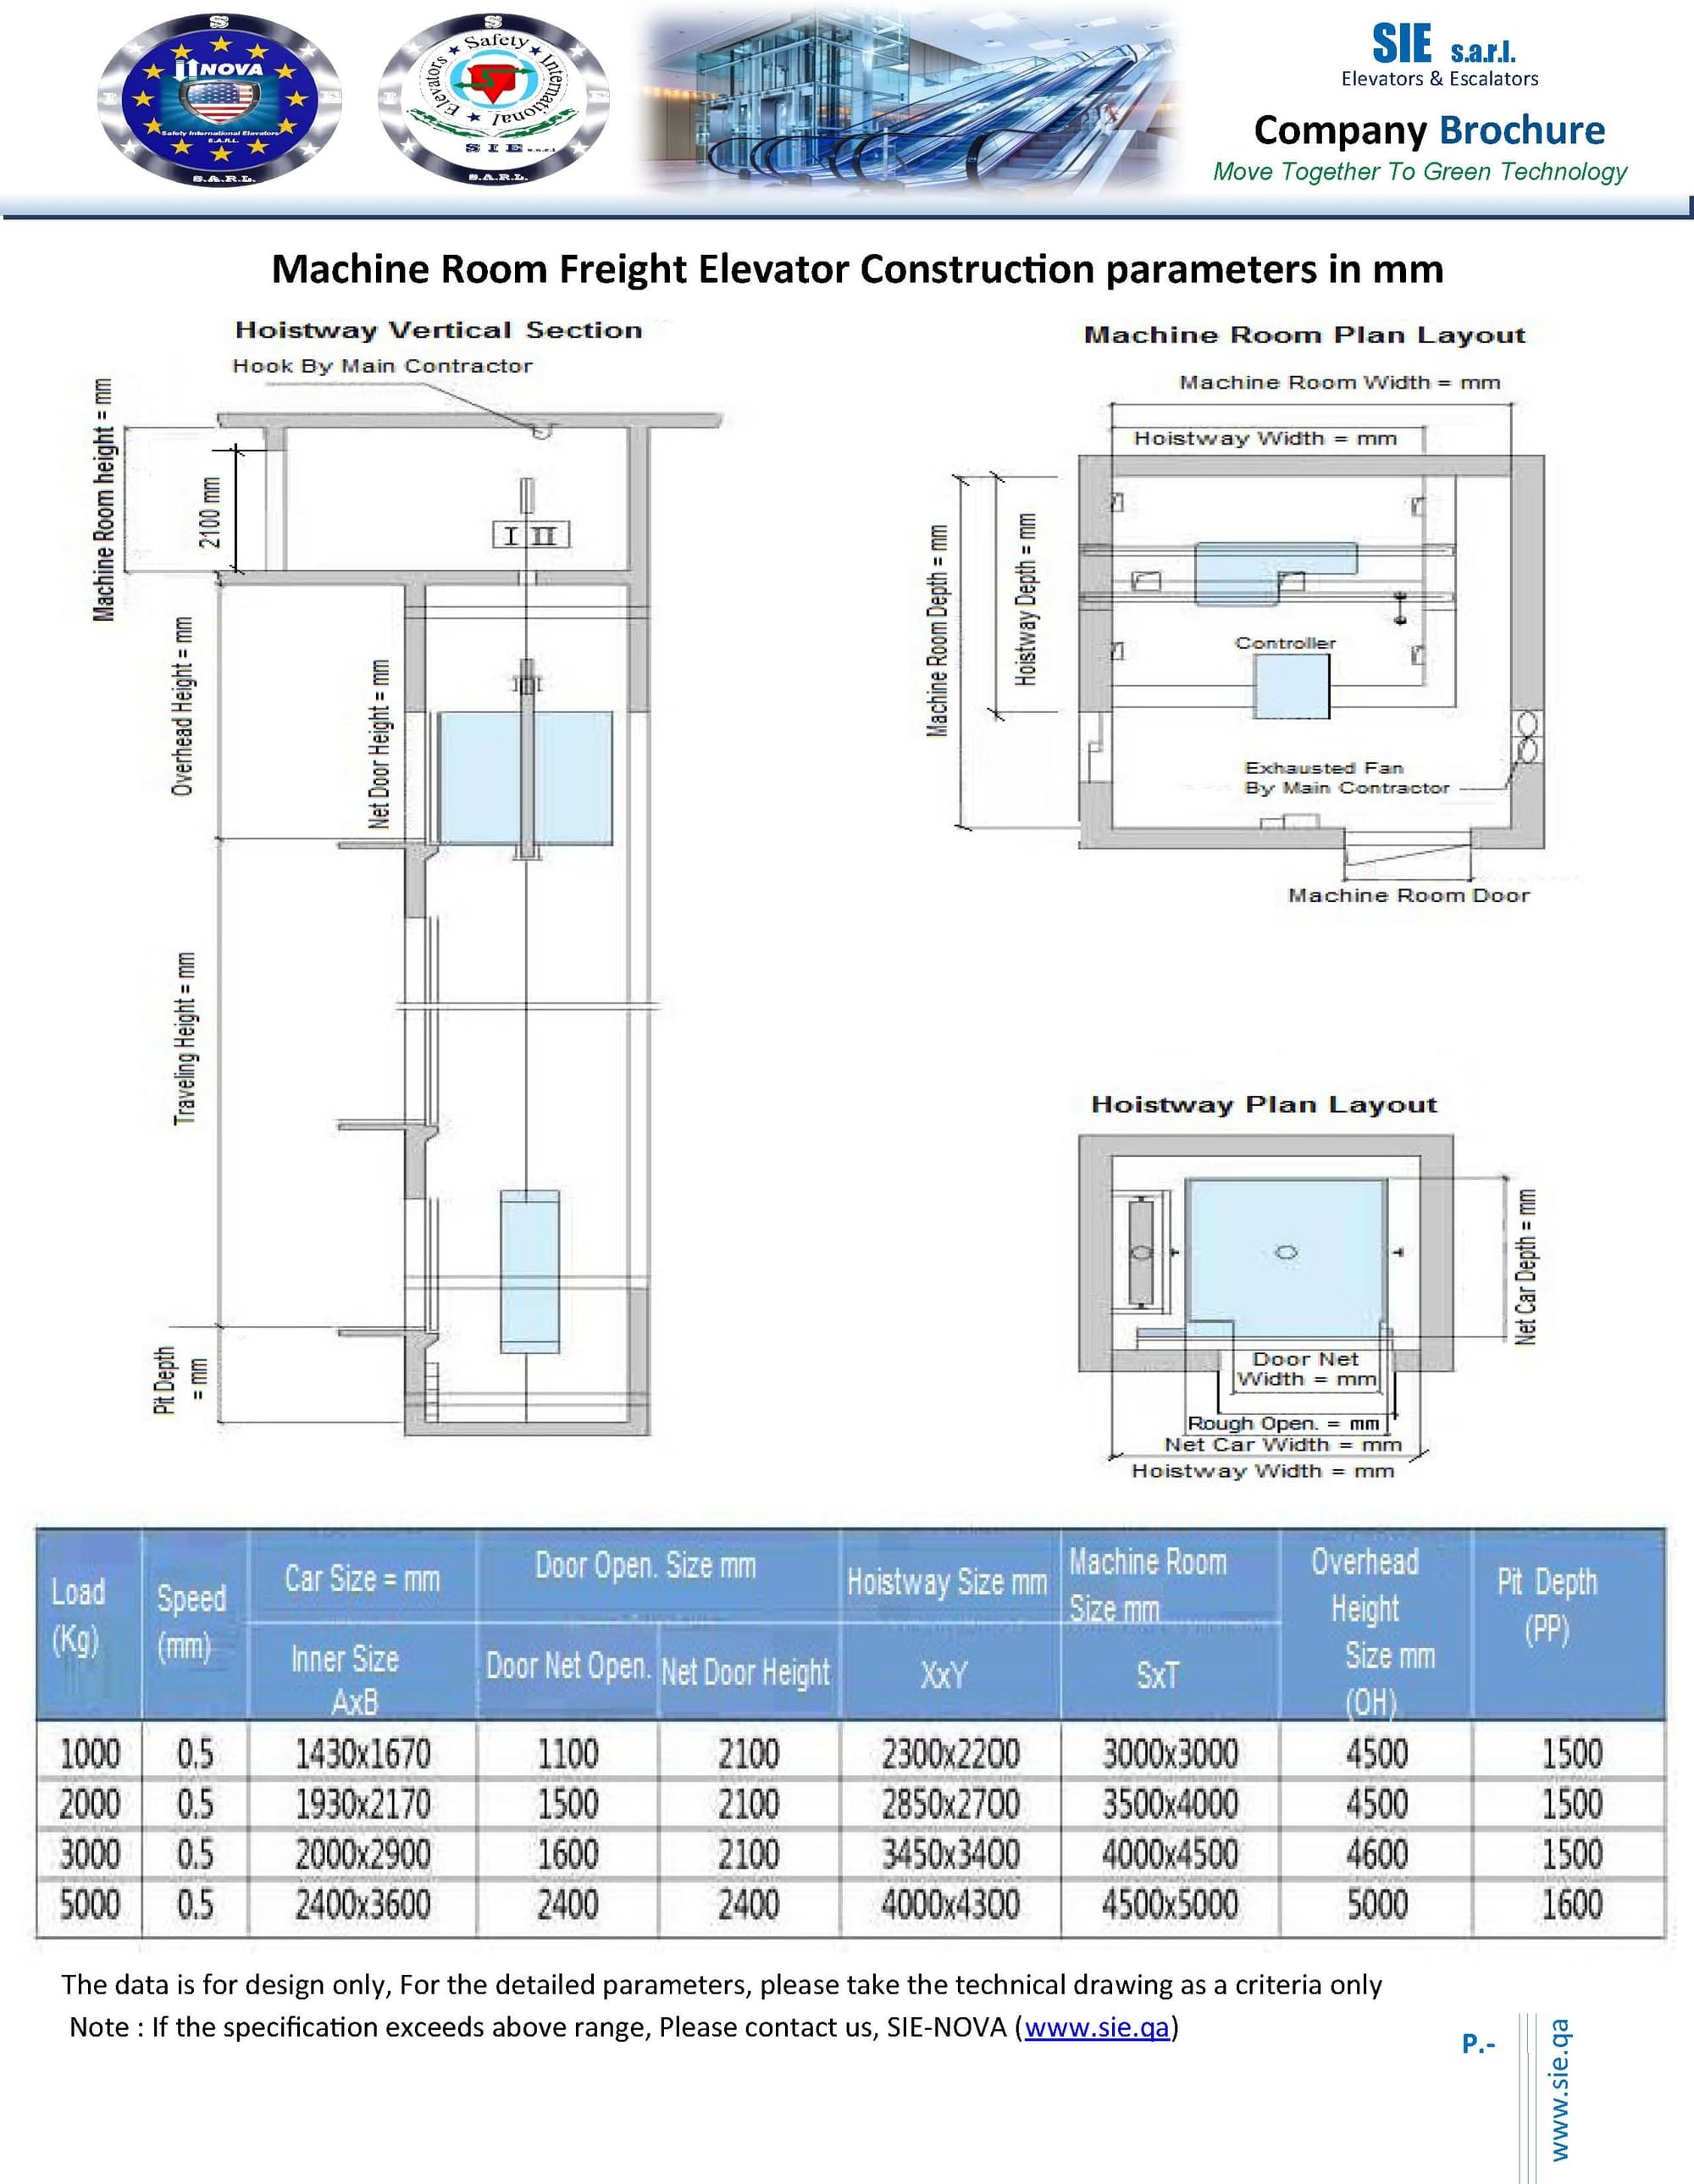 Freight Elevator - Machine Room Dimensions